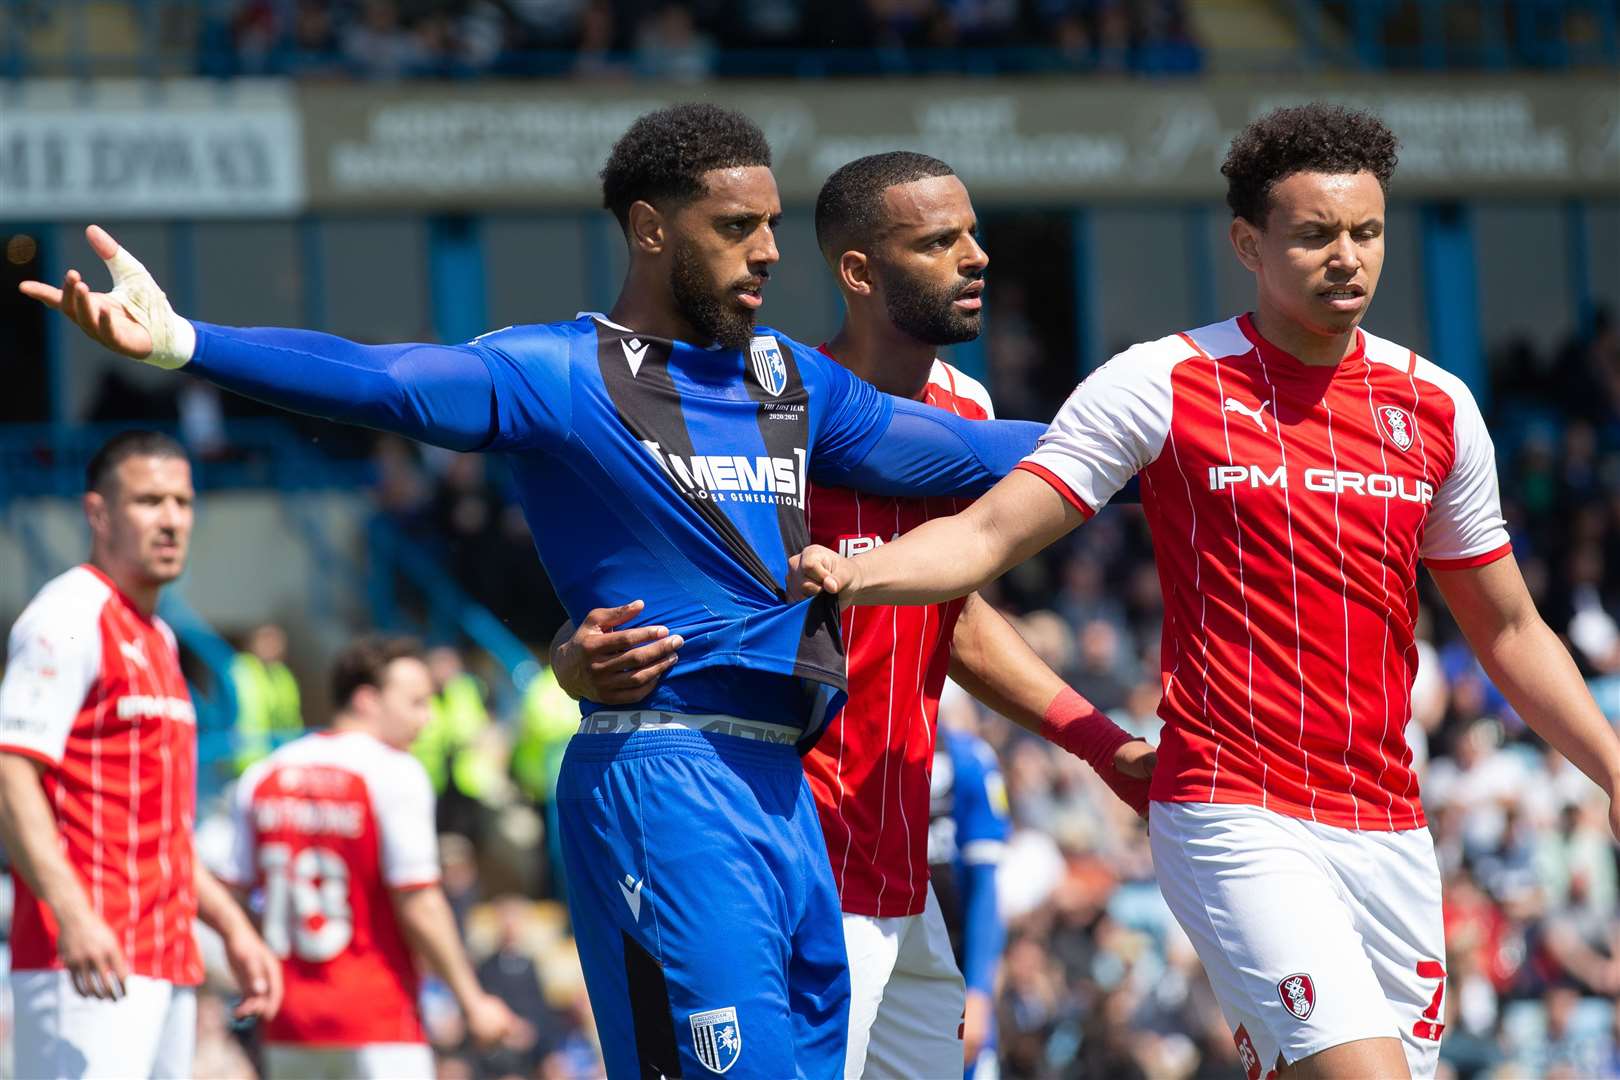 Gillingham striker Vadaine Oliver crowded out Picture: KPI